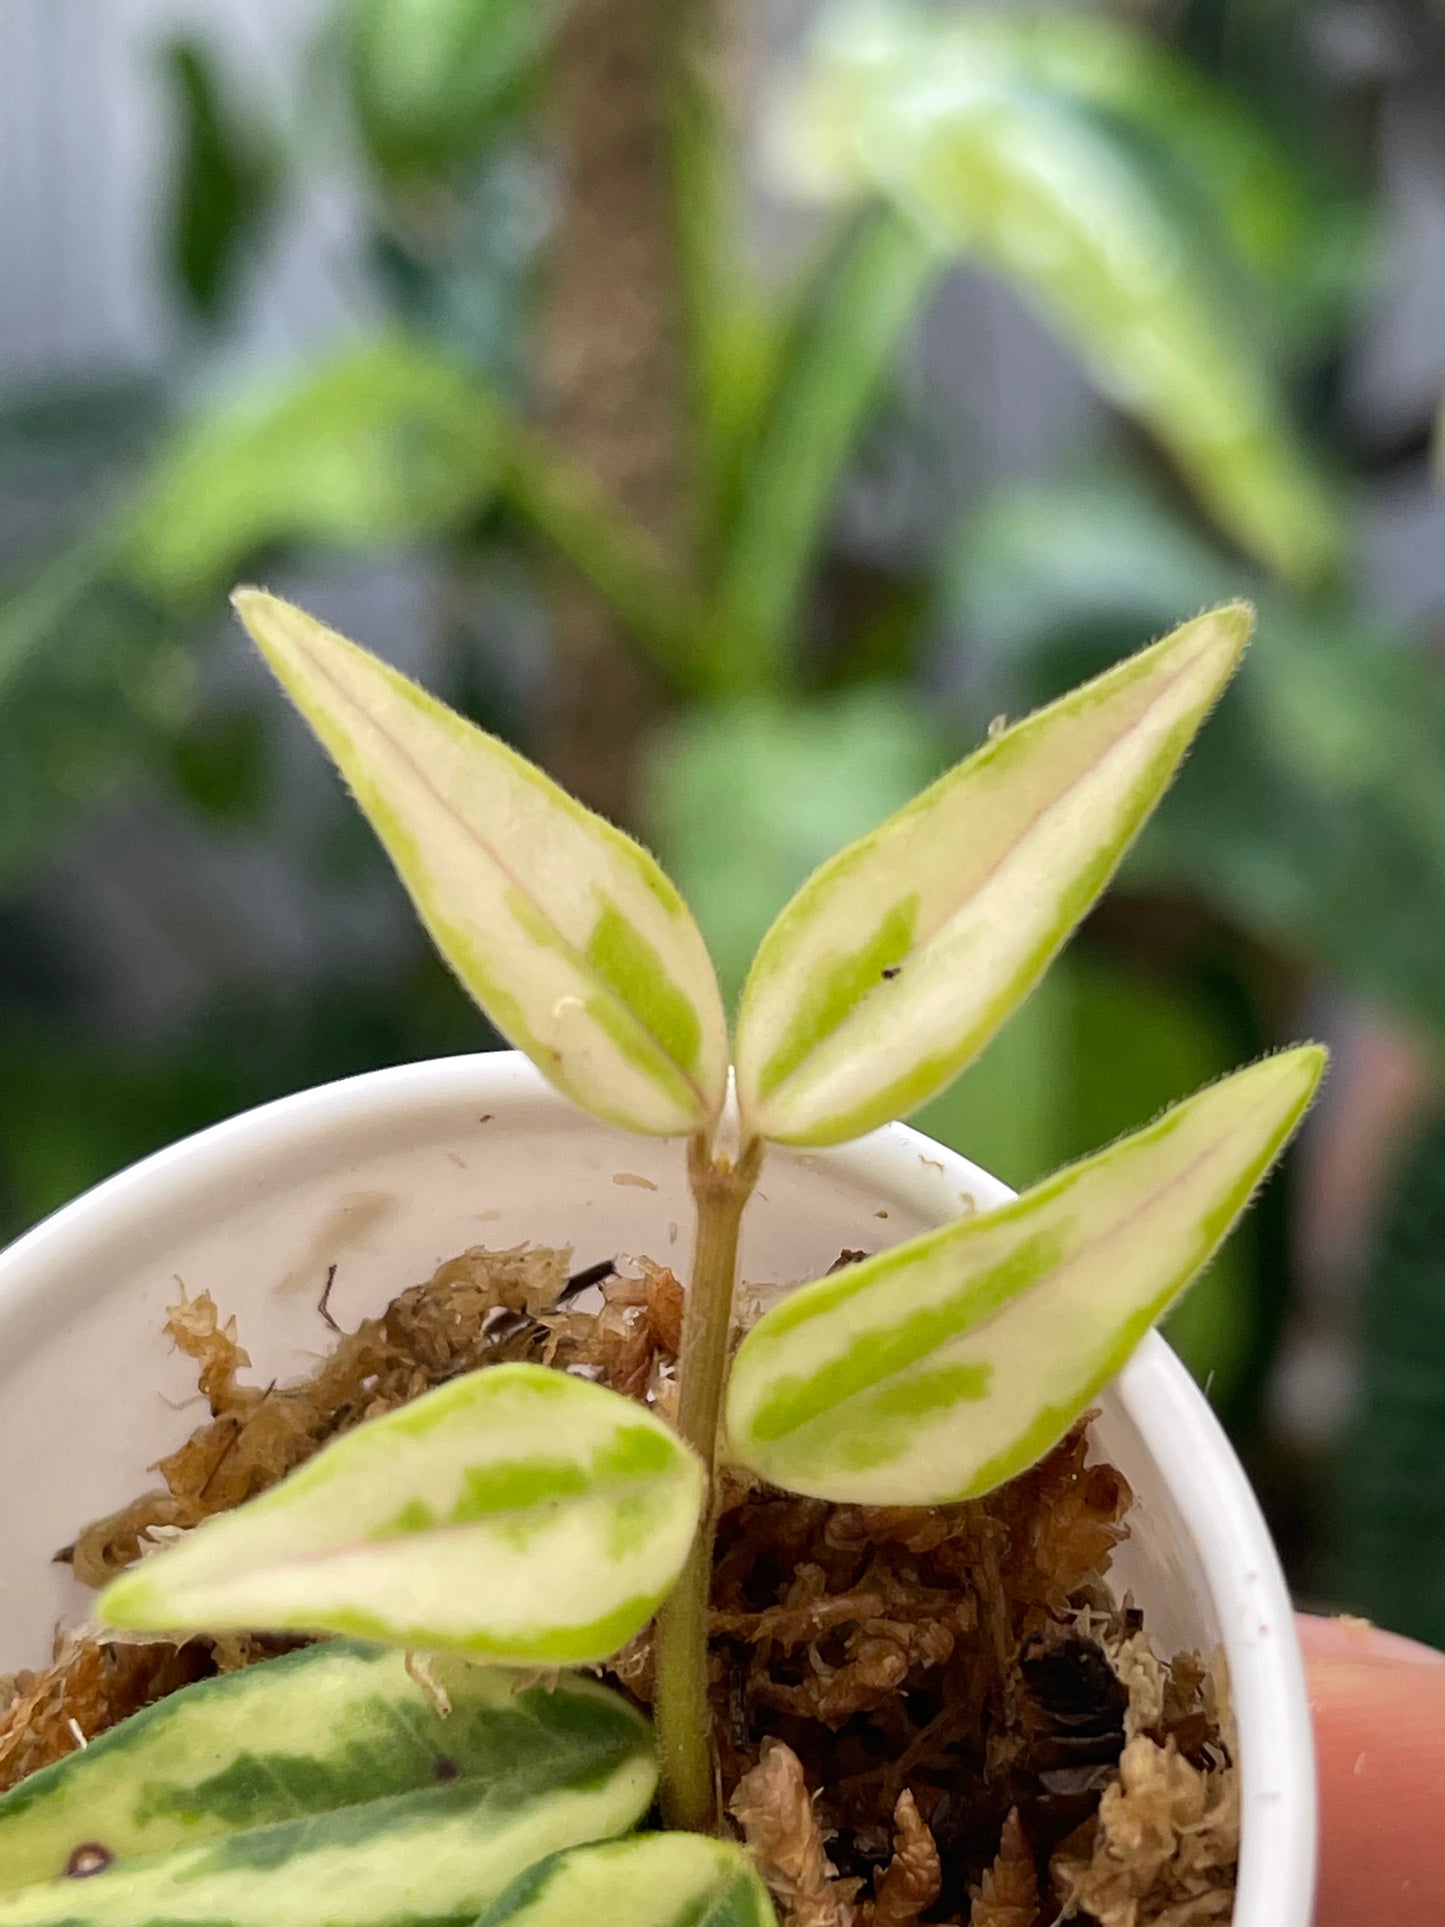 Private sale: hoya luis bois rooting cutting